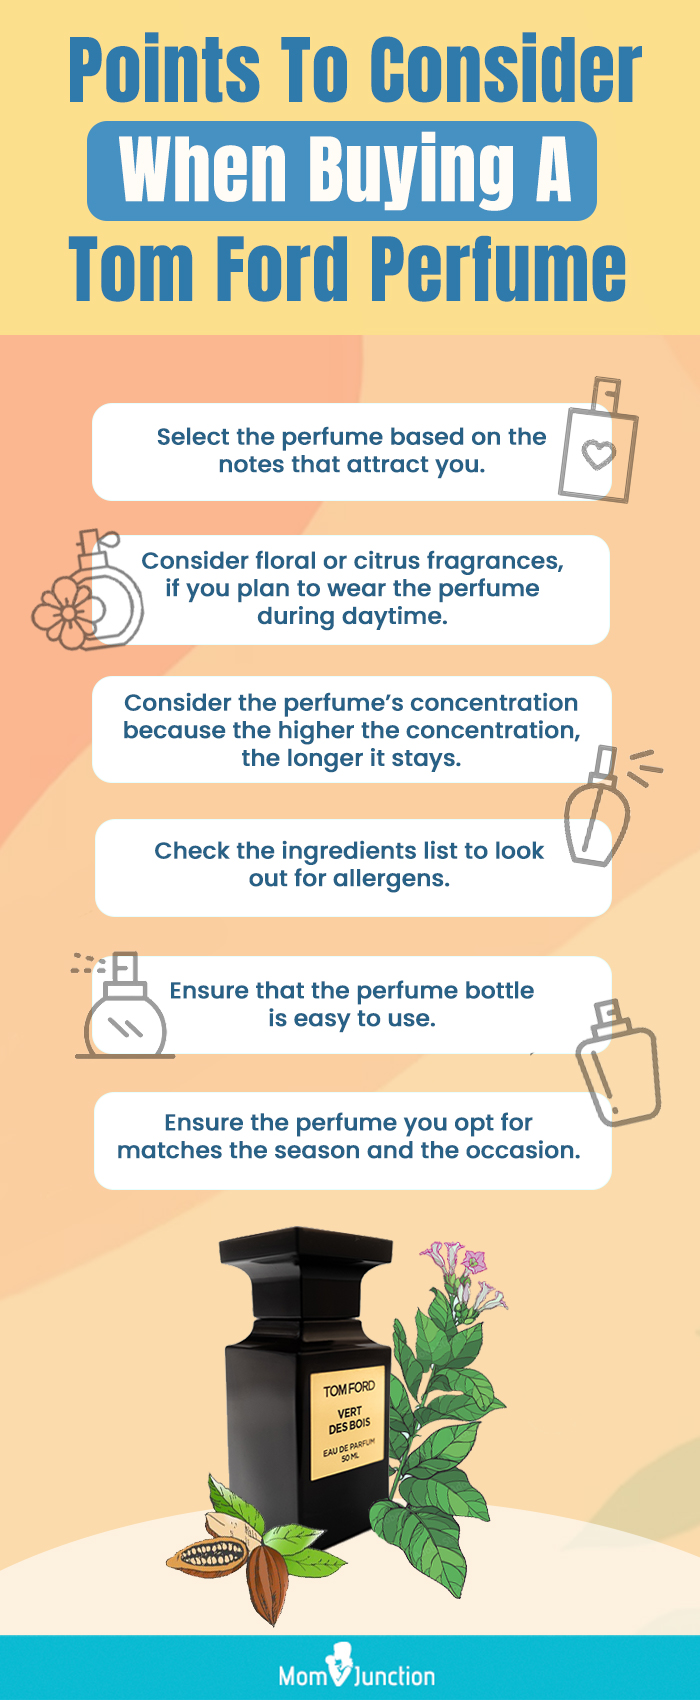 Points To Consider When Buying A Tom Ford Perfume (infographic)